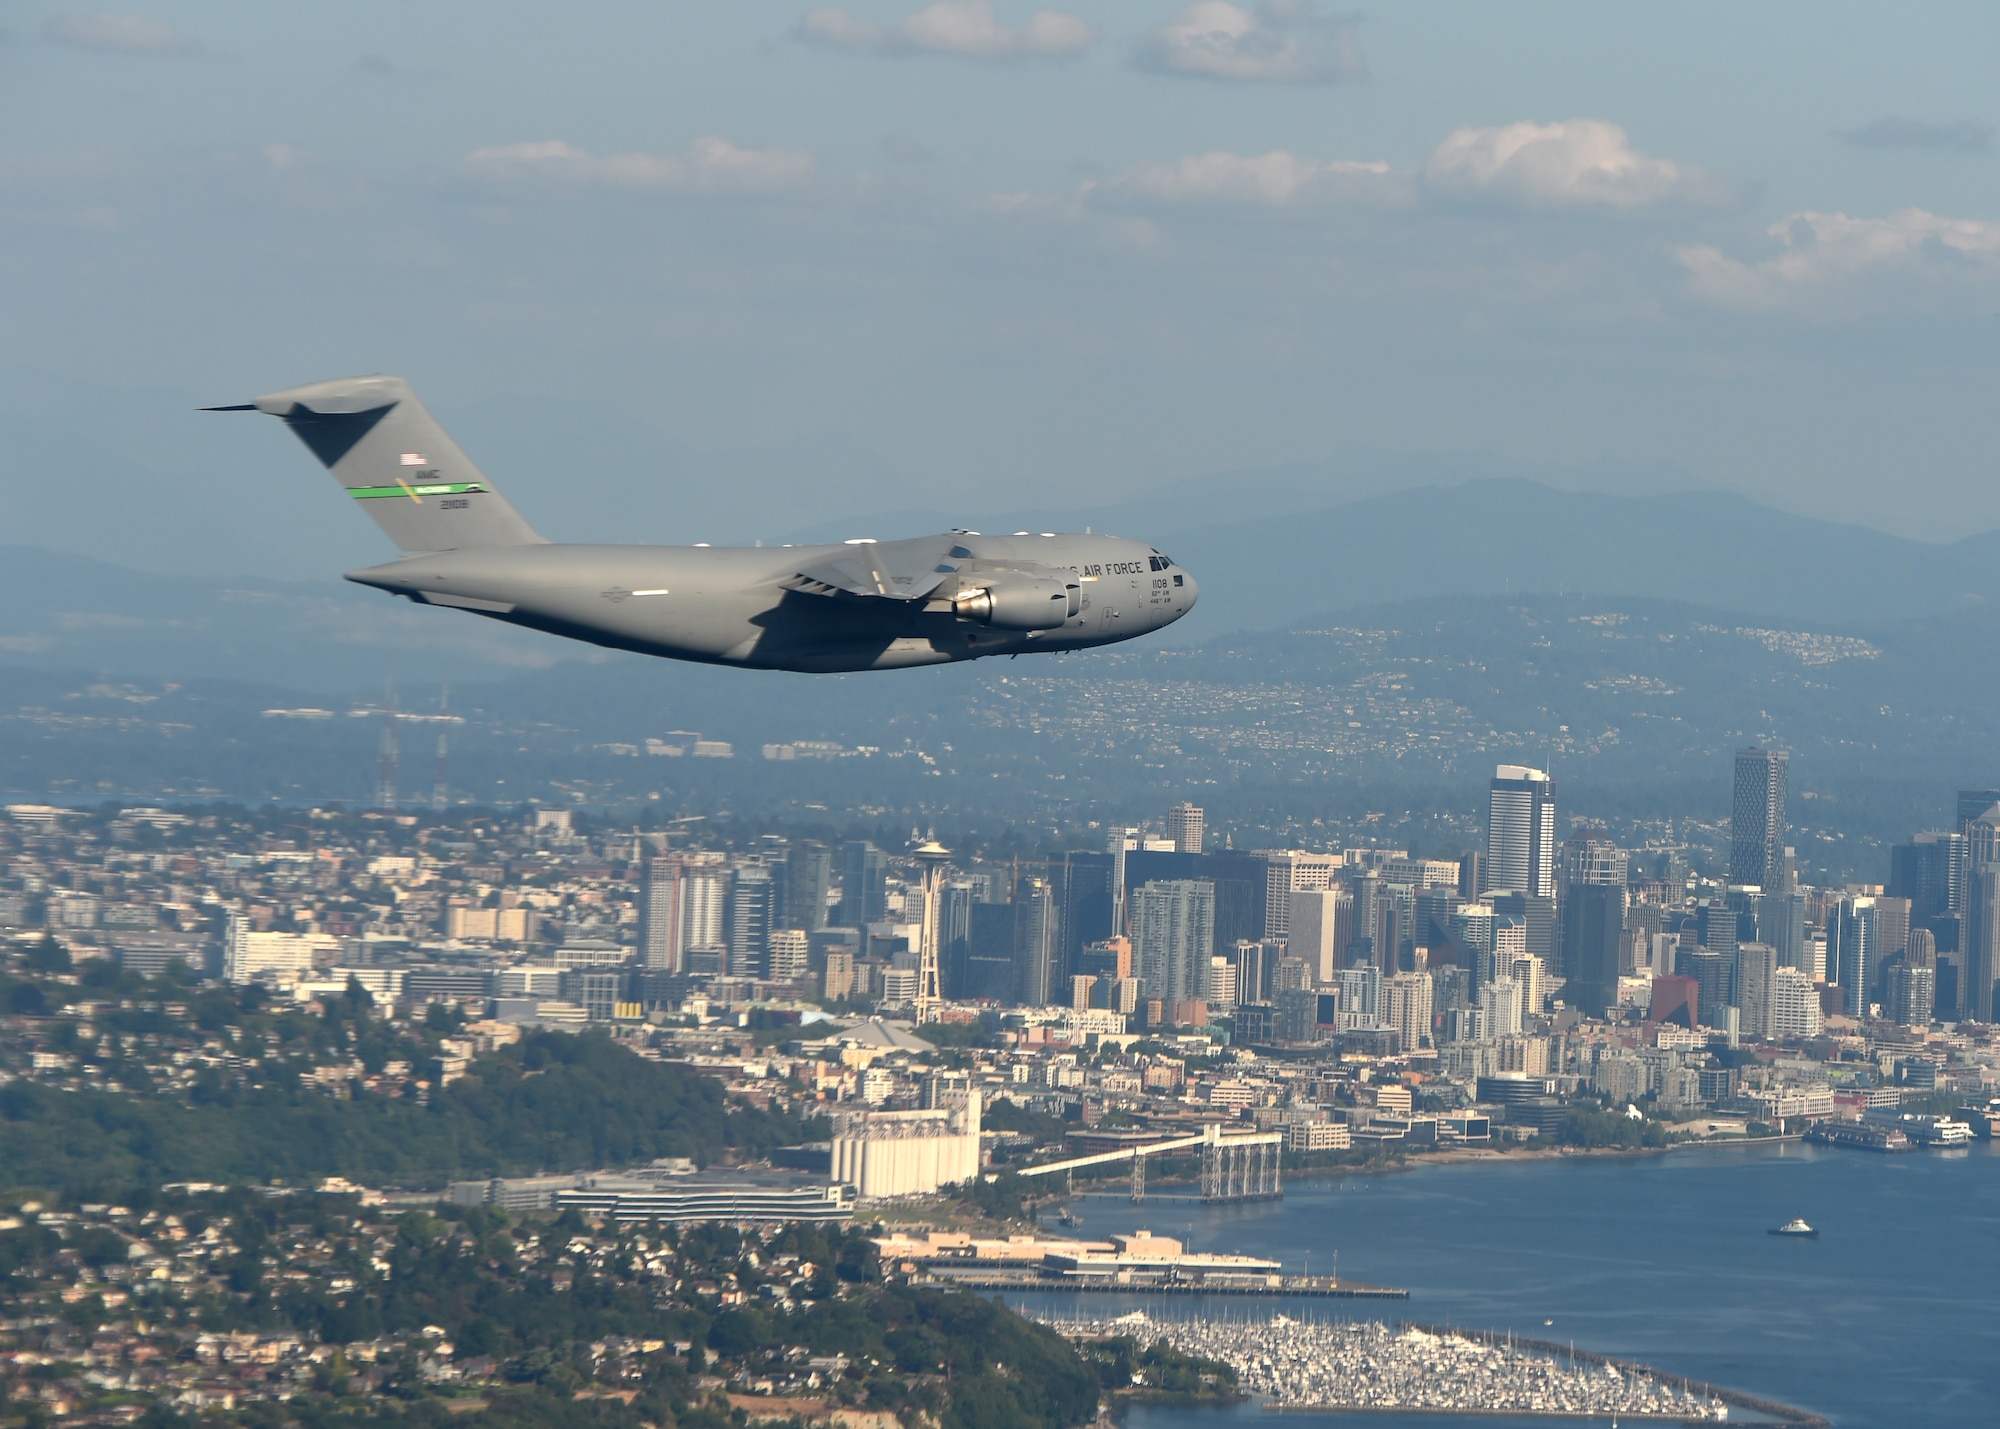 A C-17 Globemaster III from Joint Base Lewis-McChord flies over the Seattle skyline after completing a low-level formation training exercise in central Washington, Aug. 5, 2020. Flying in a formation of two or more aircrafts in a combat scenario allows for tactical advantage by establishing mutual support and mass of aircraft over an objective area.  (U.S. Air Force photo by Airman 1st Class Mikayla Heineck)